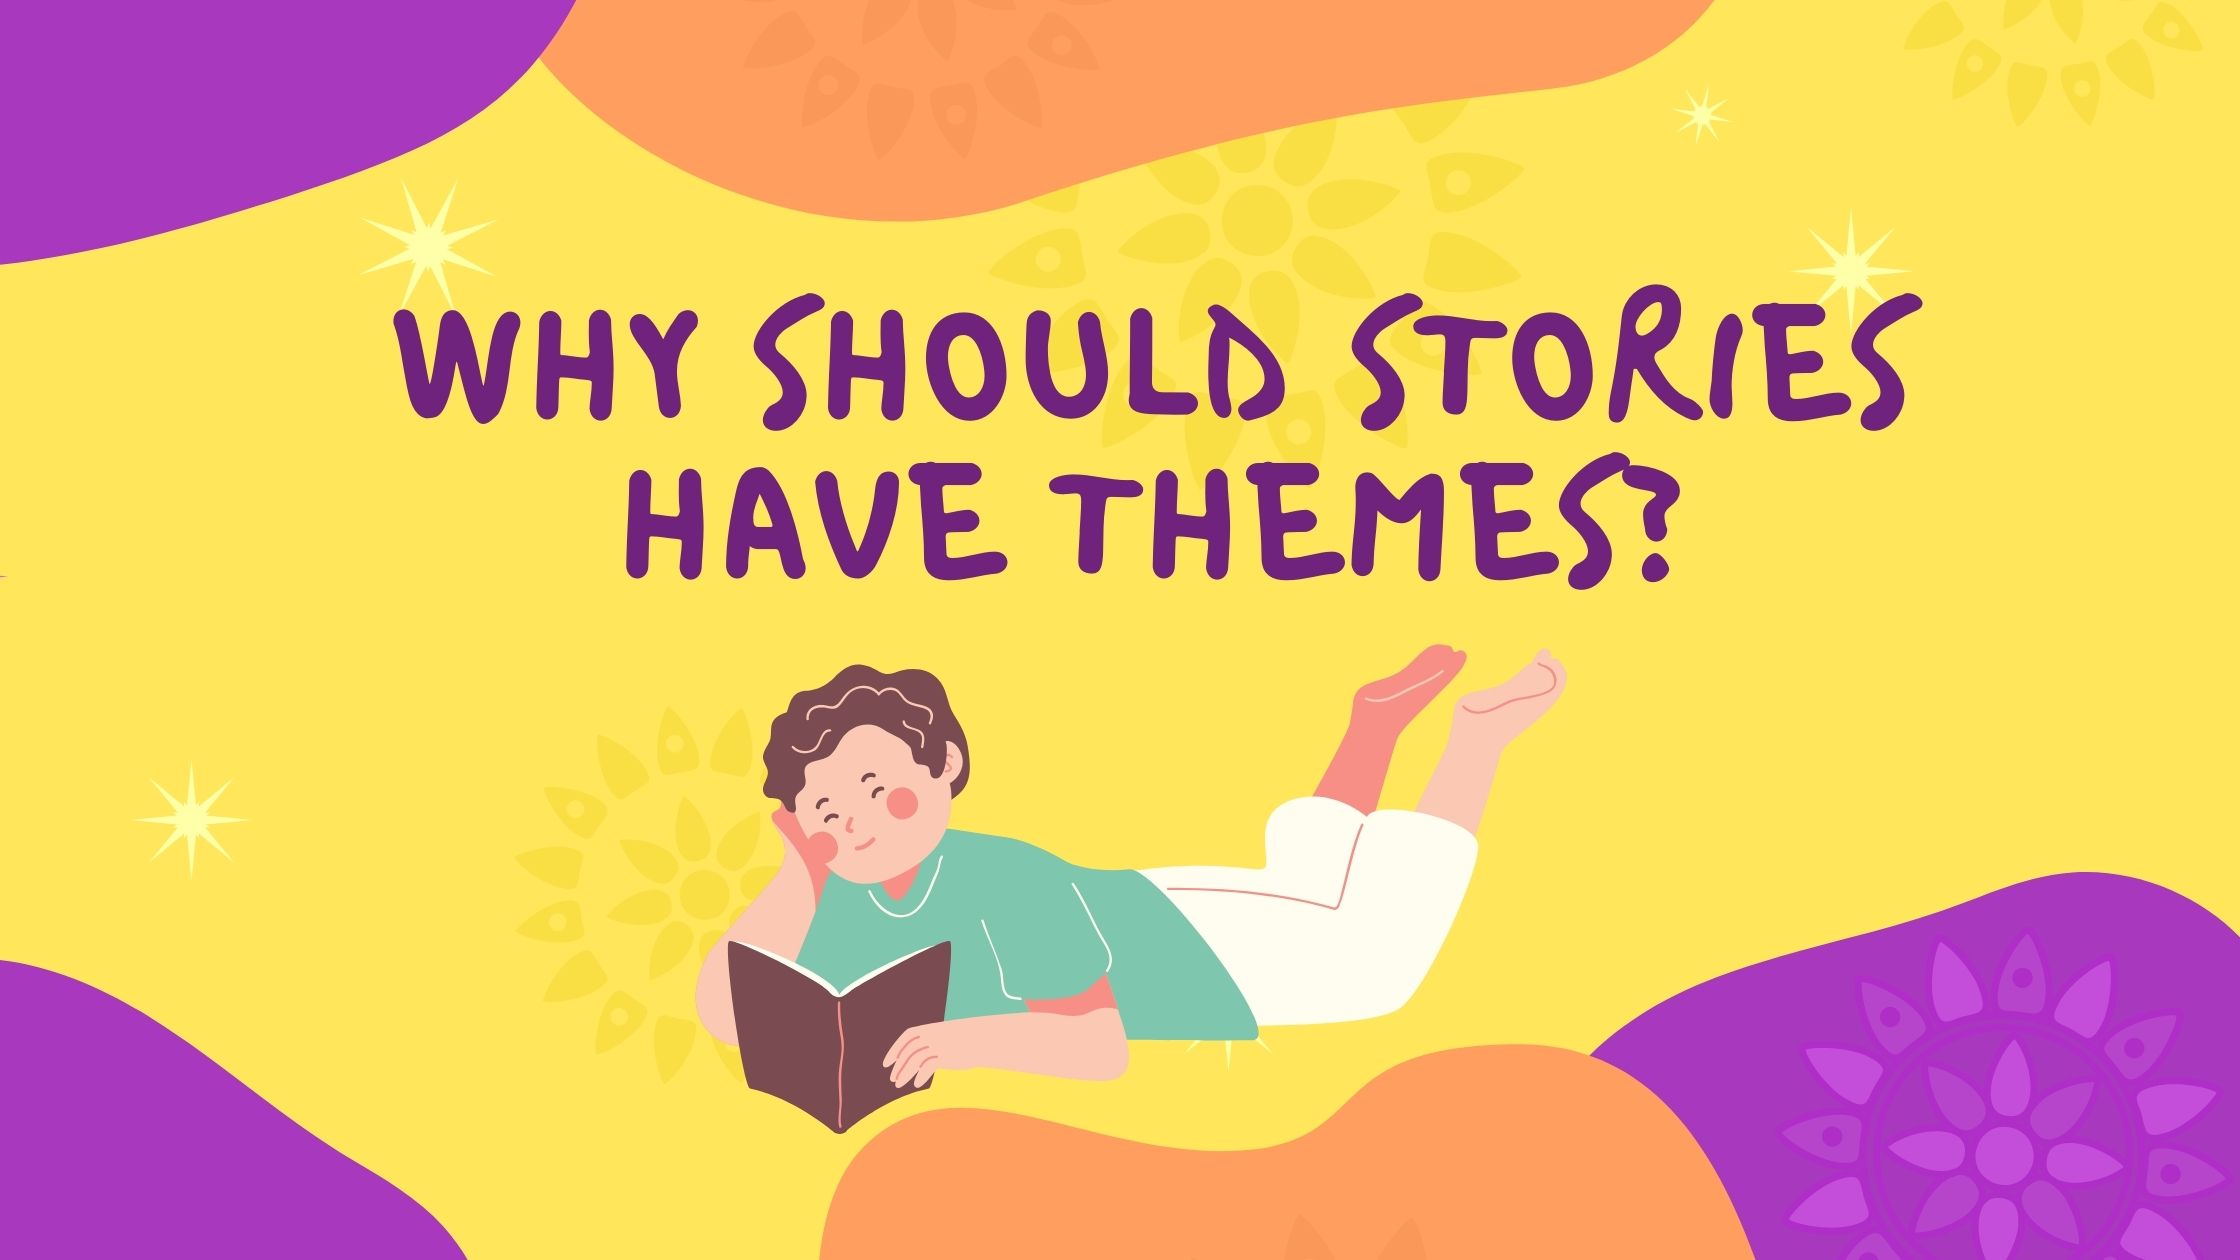 Why should stories have themes? #WorldBookDay